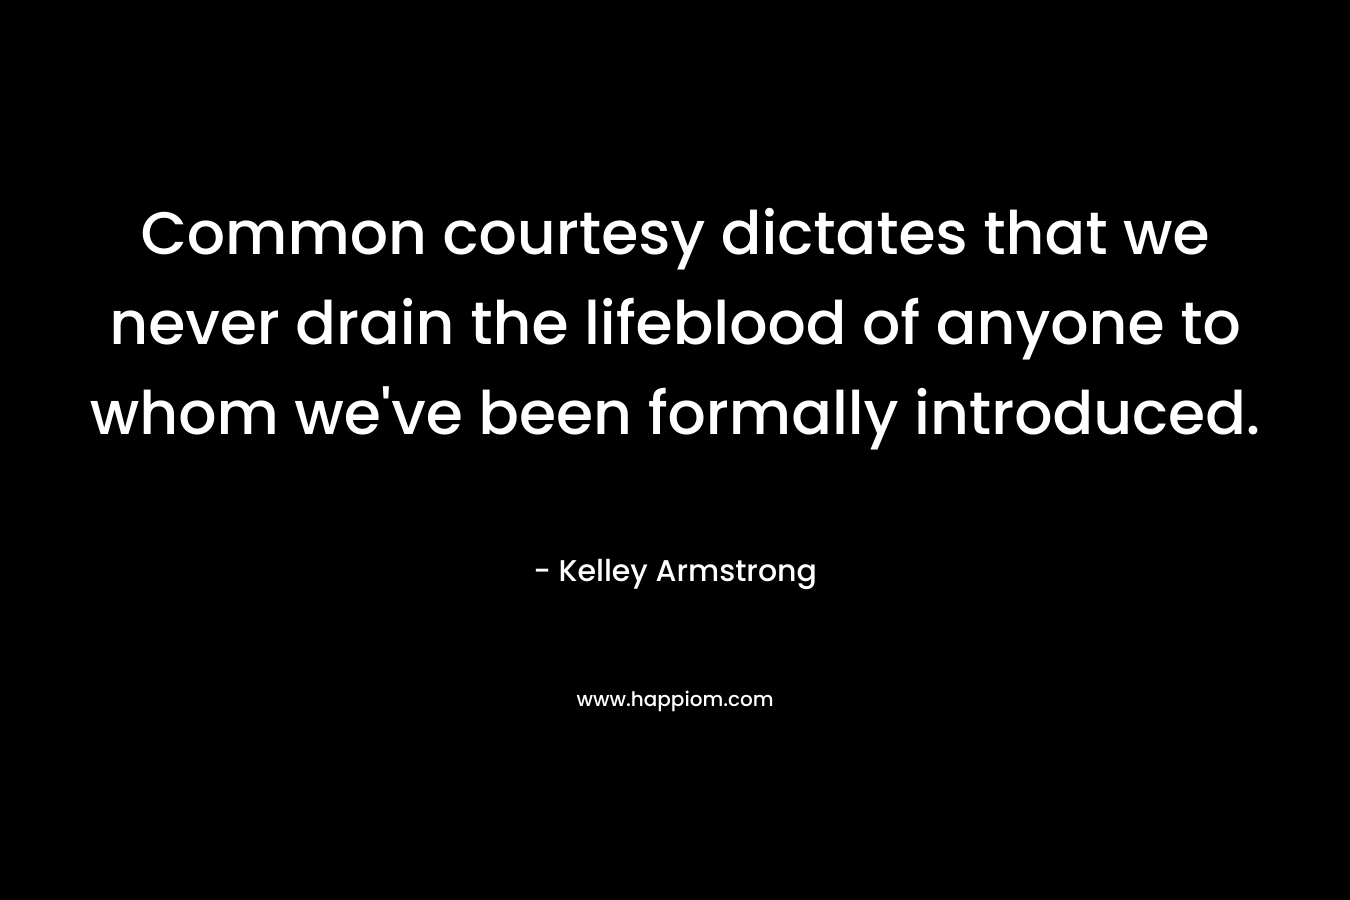 Common courtesy dictates that we never drain the lifeblood of anyone to whom we've been formally introduced.